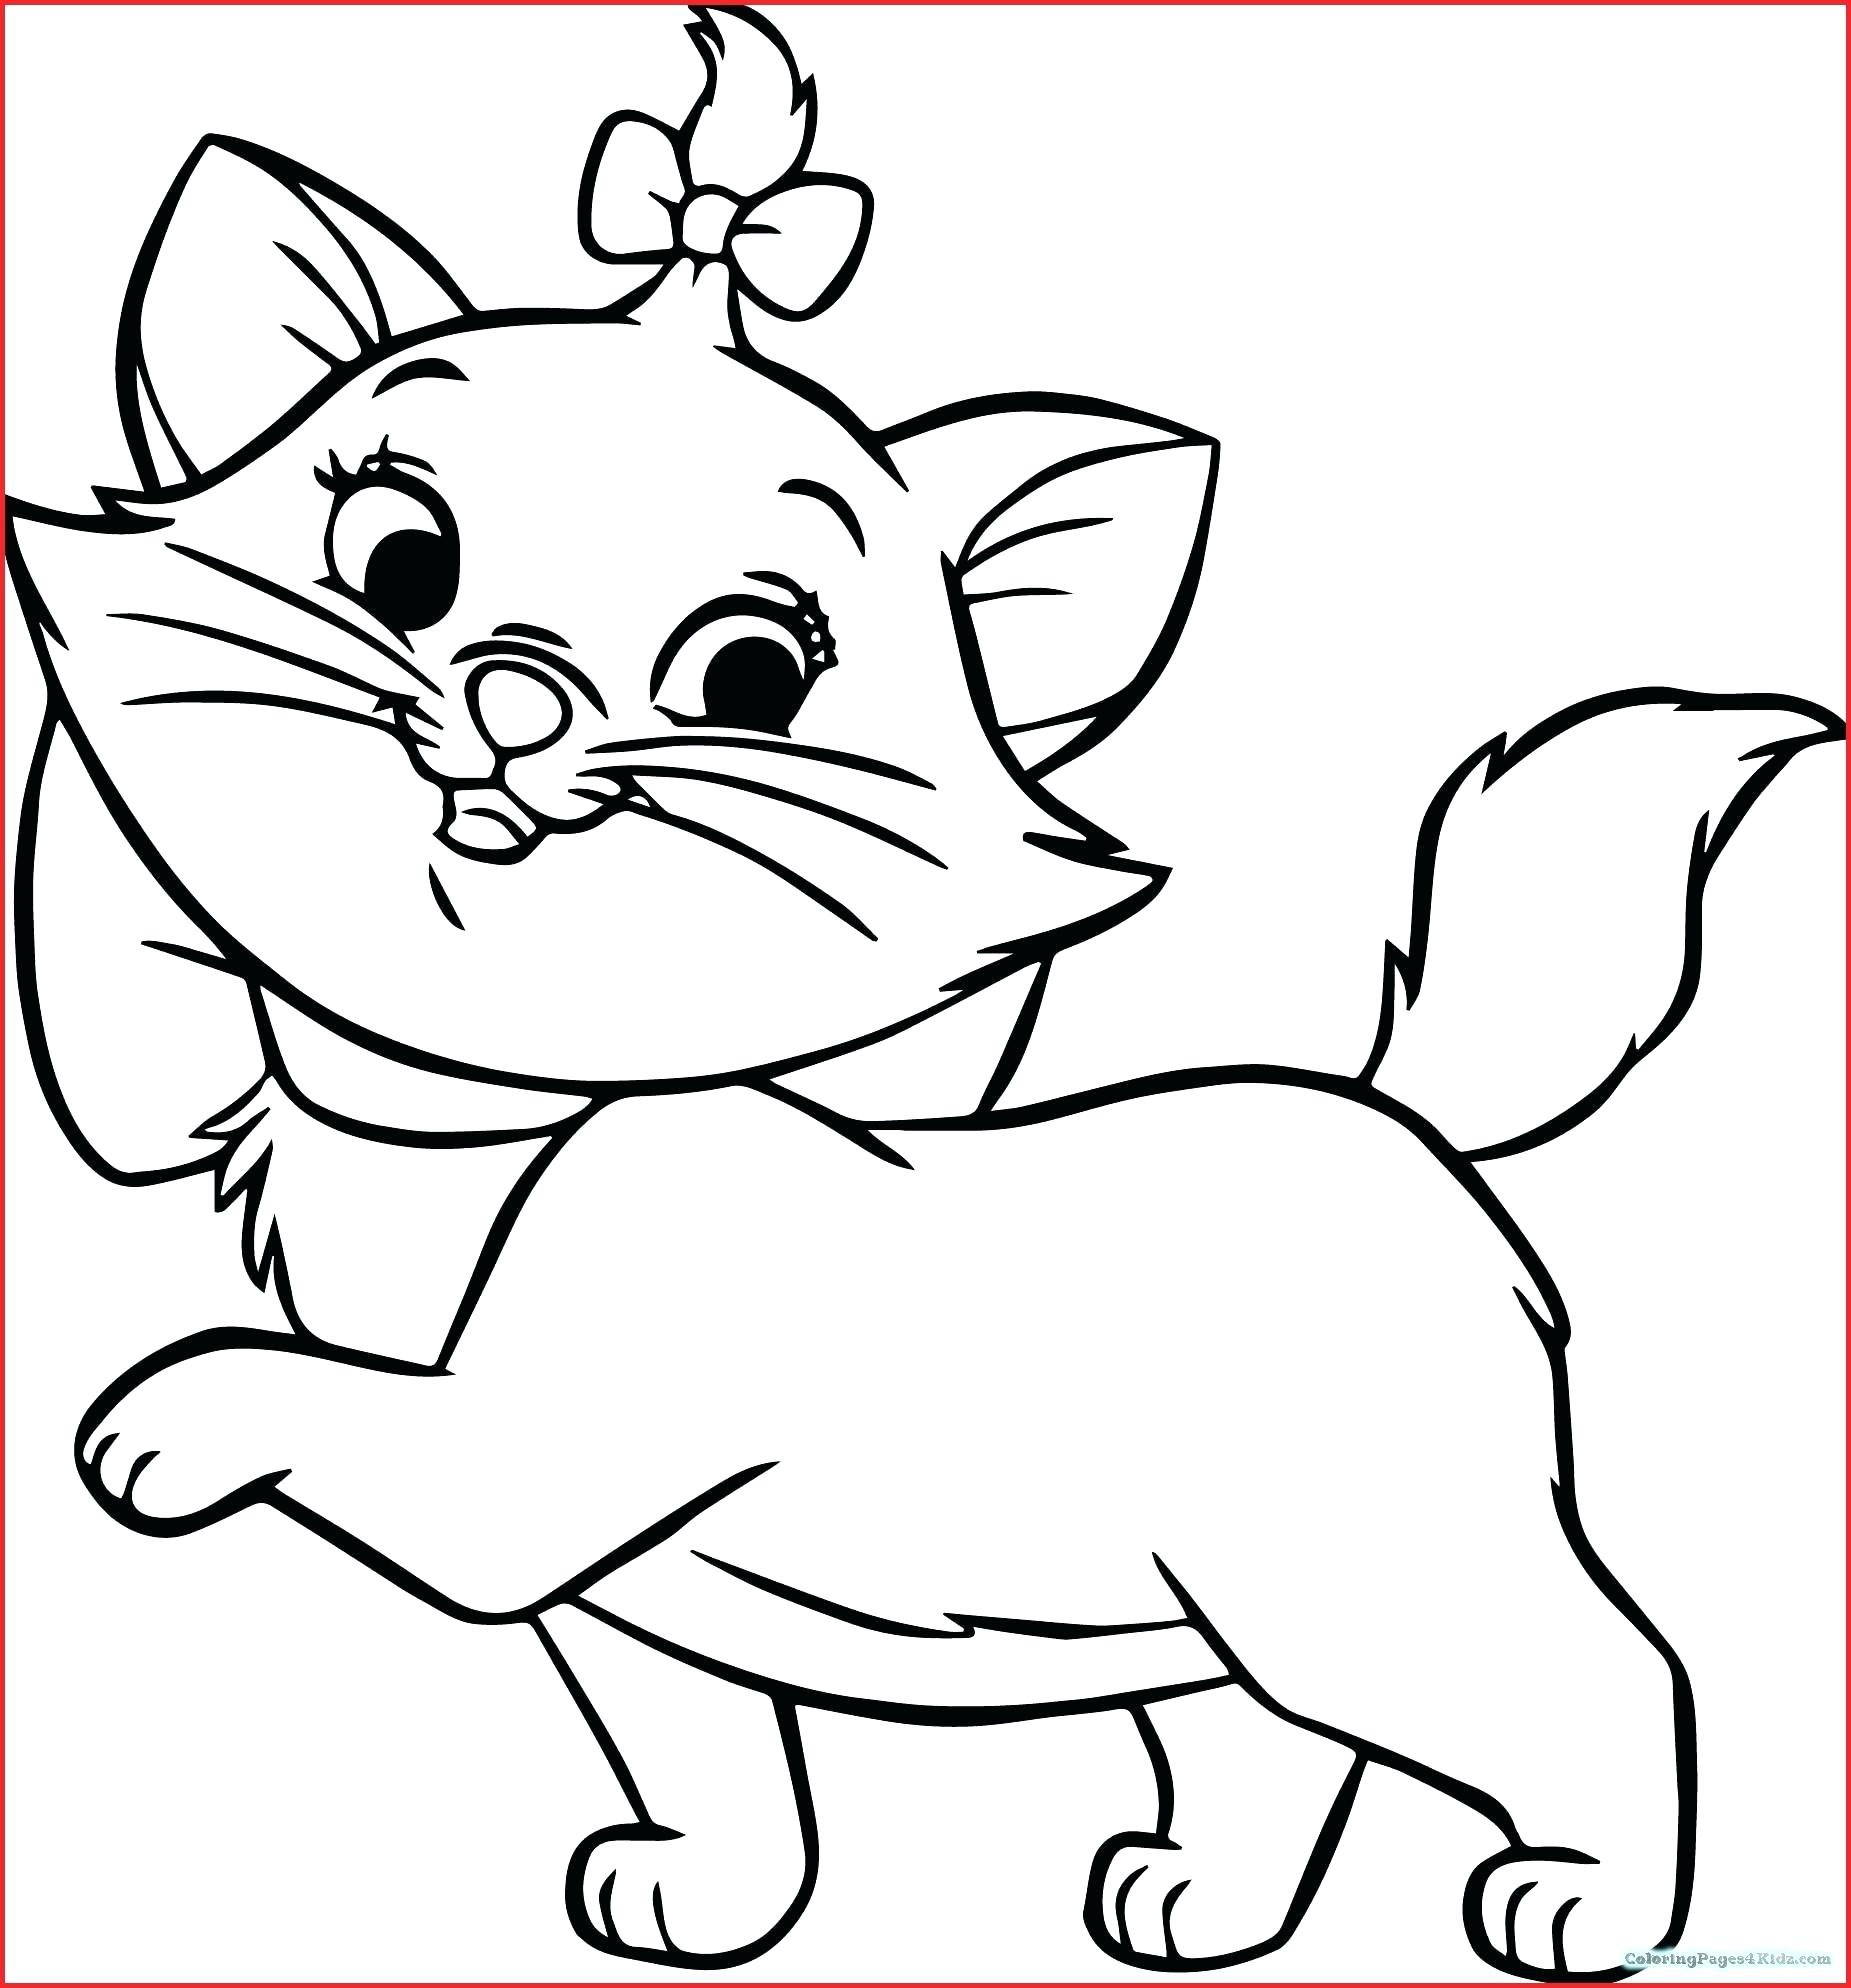 kitten-coloring-pages-free-printable-fun-coloring